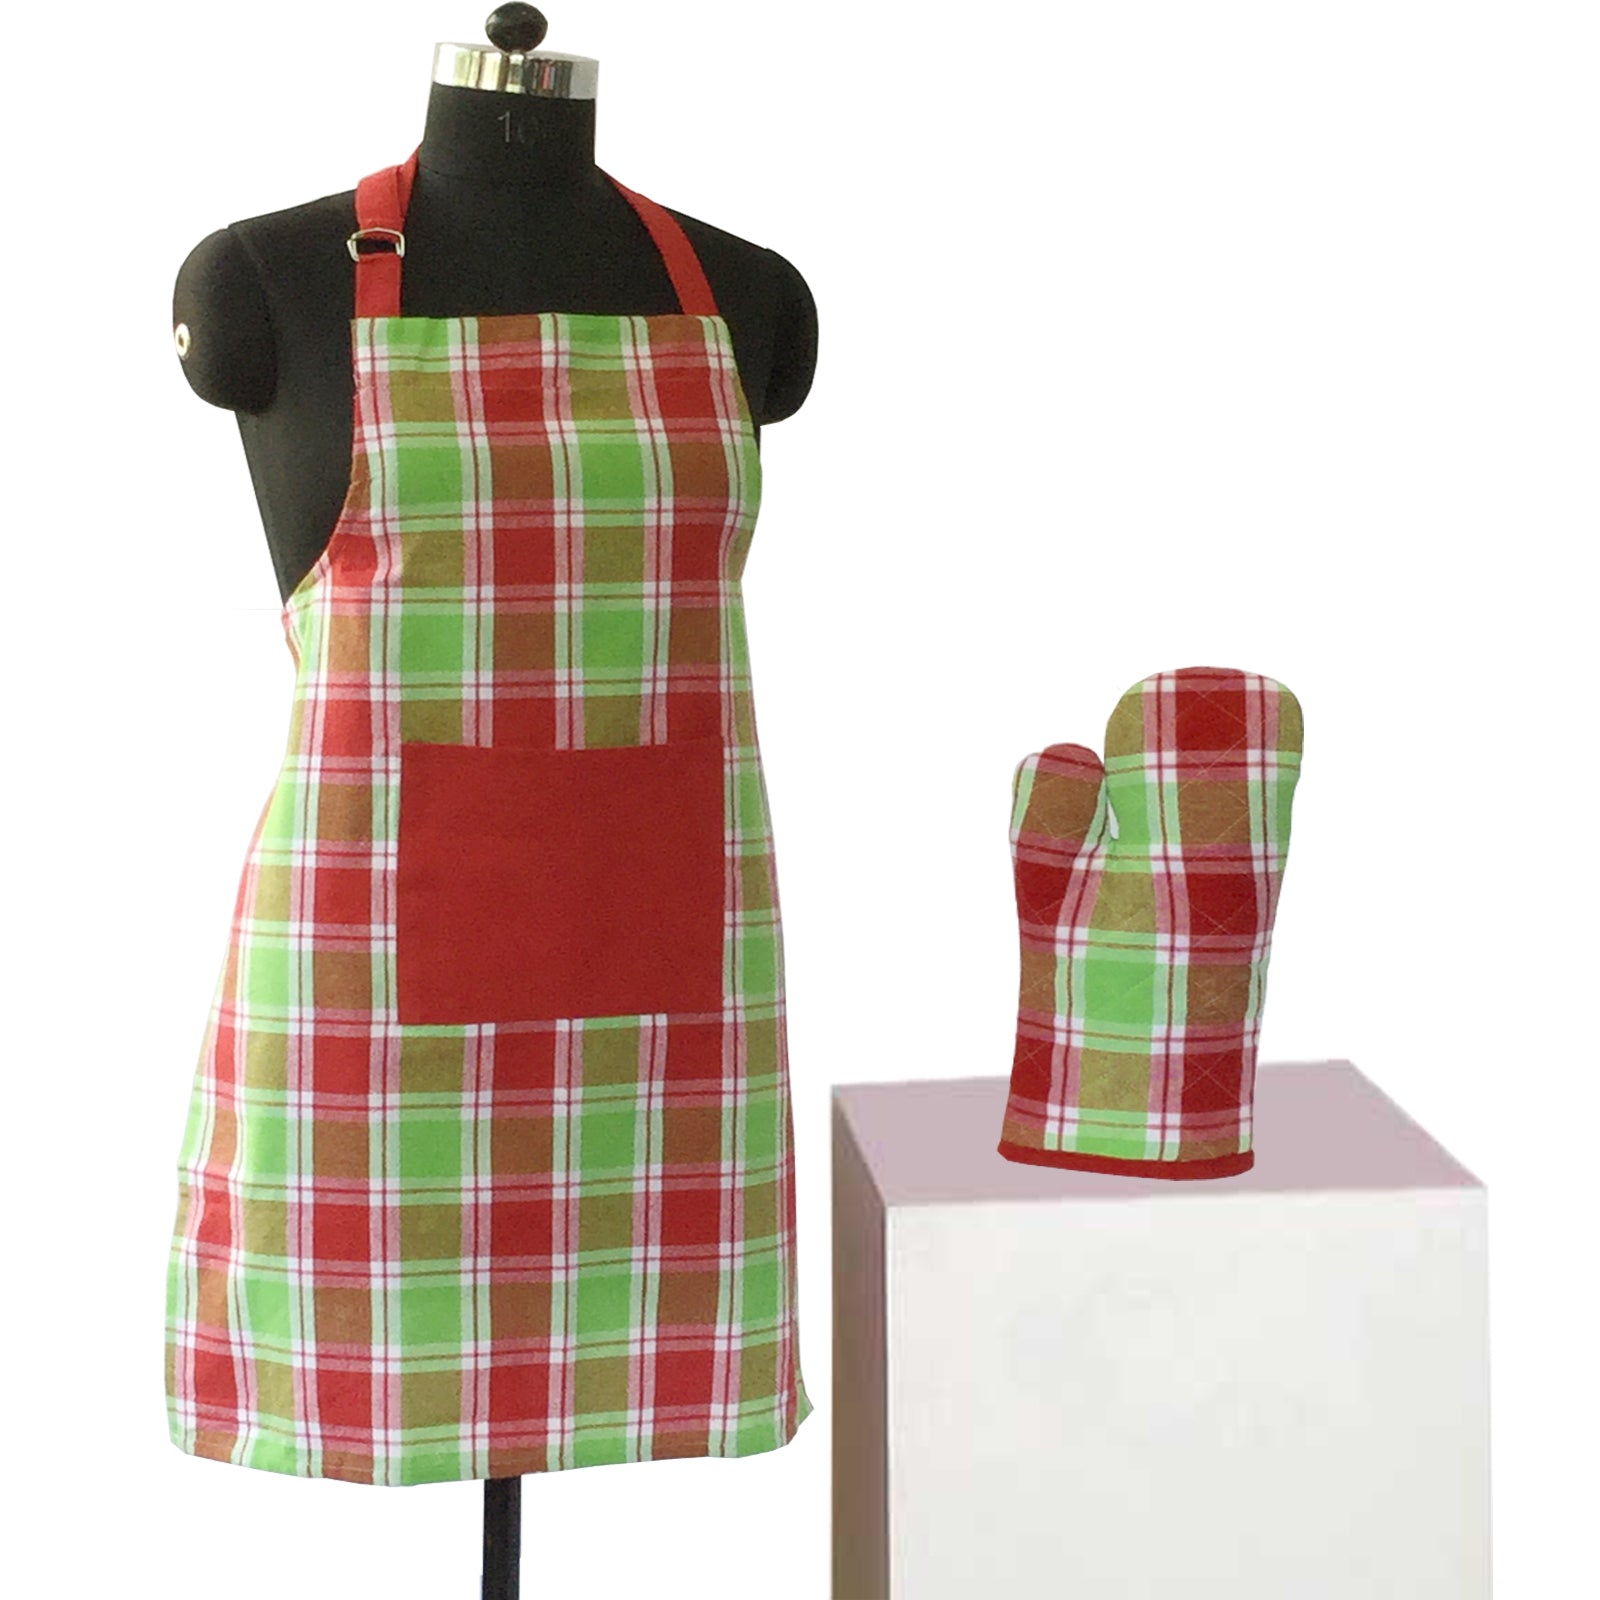 Lushomes Checks red and Green Kitchen Cooking Apron Set for Women (2 Pc Set, Oven Glove 17 x 32 cm, Apron 60 x 80 cms)